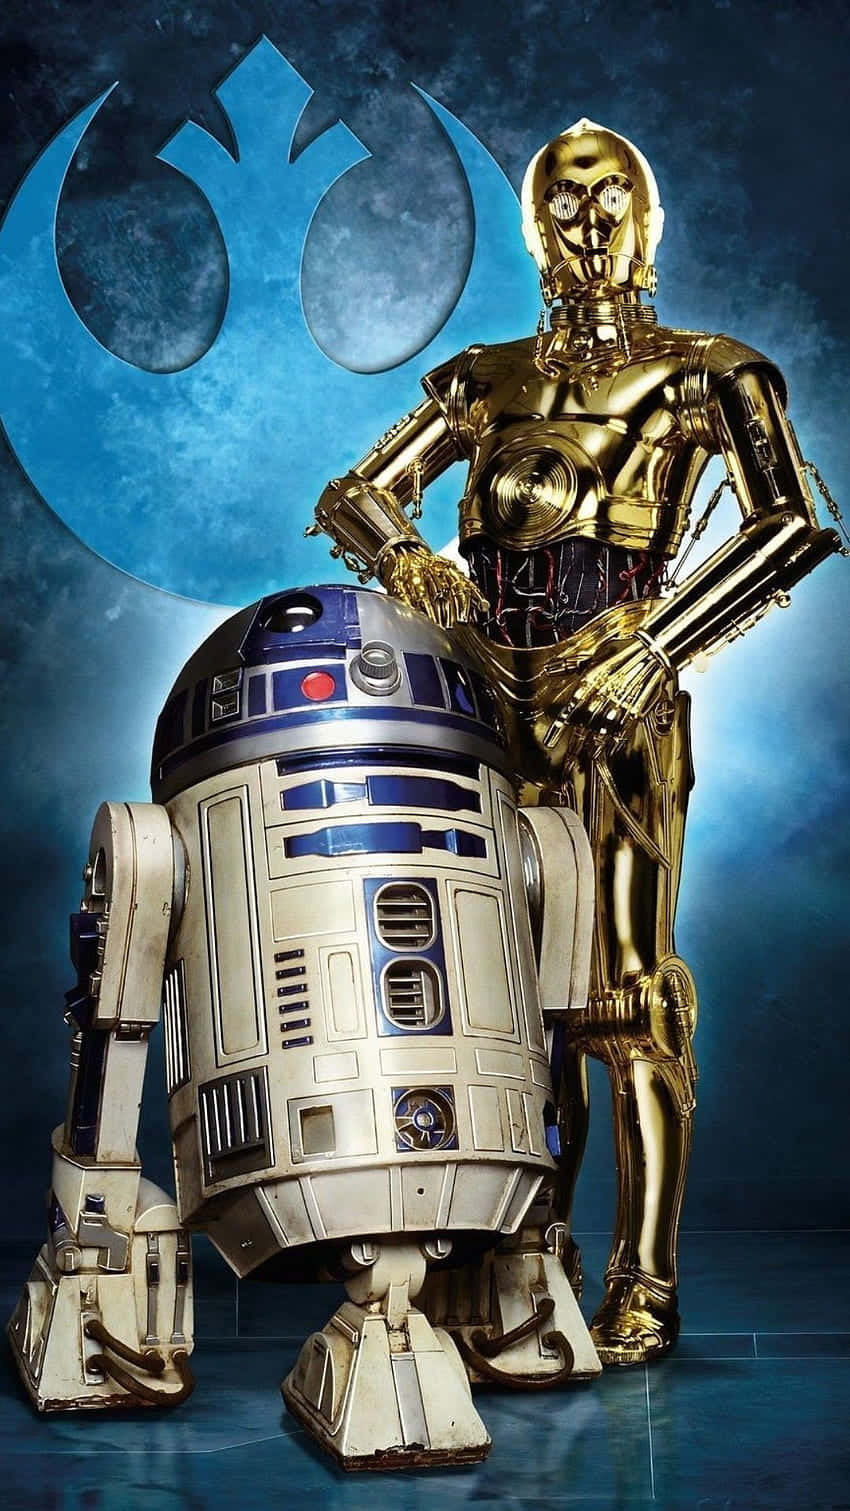 "The ever-loyal droid, R2-D2" Wallpaper